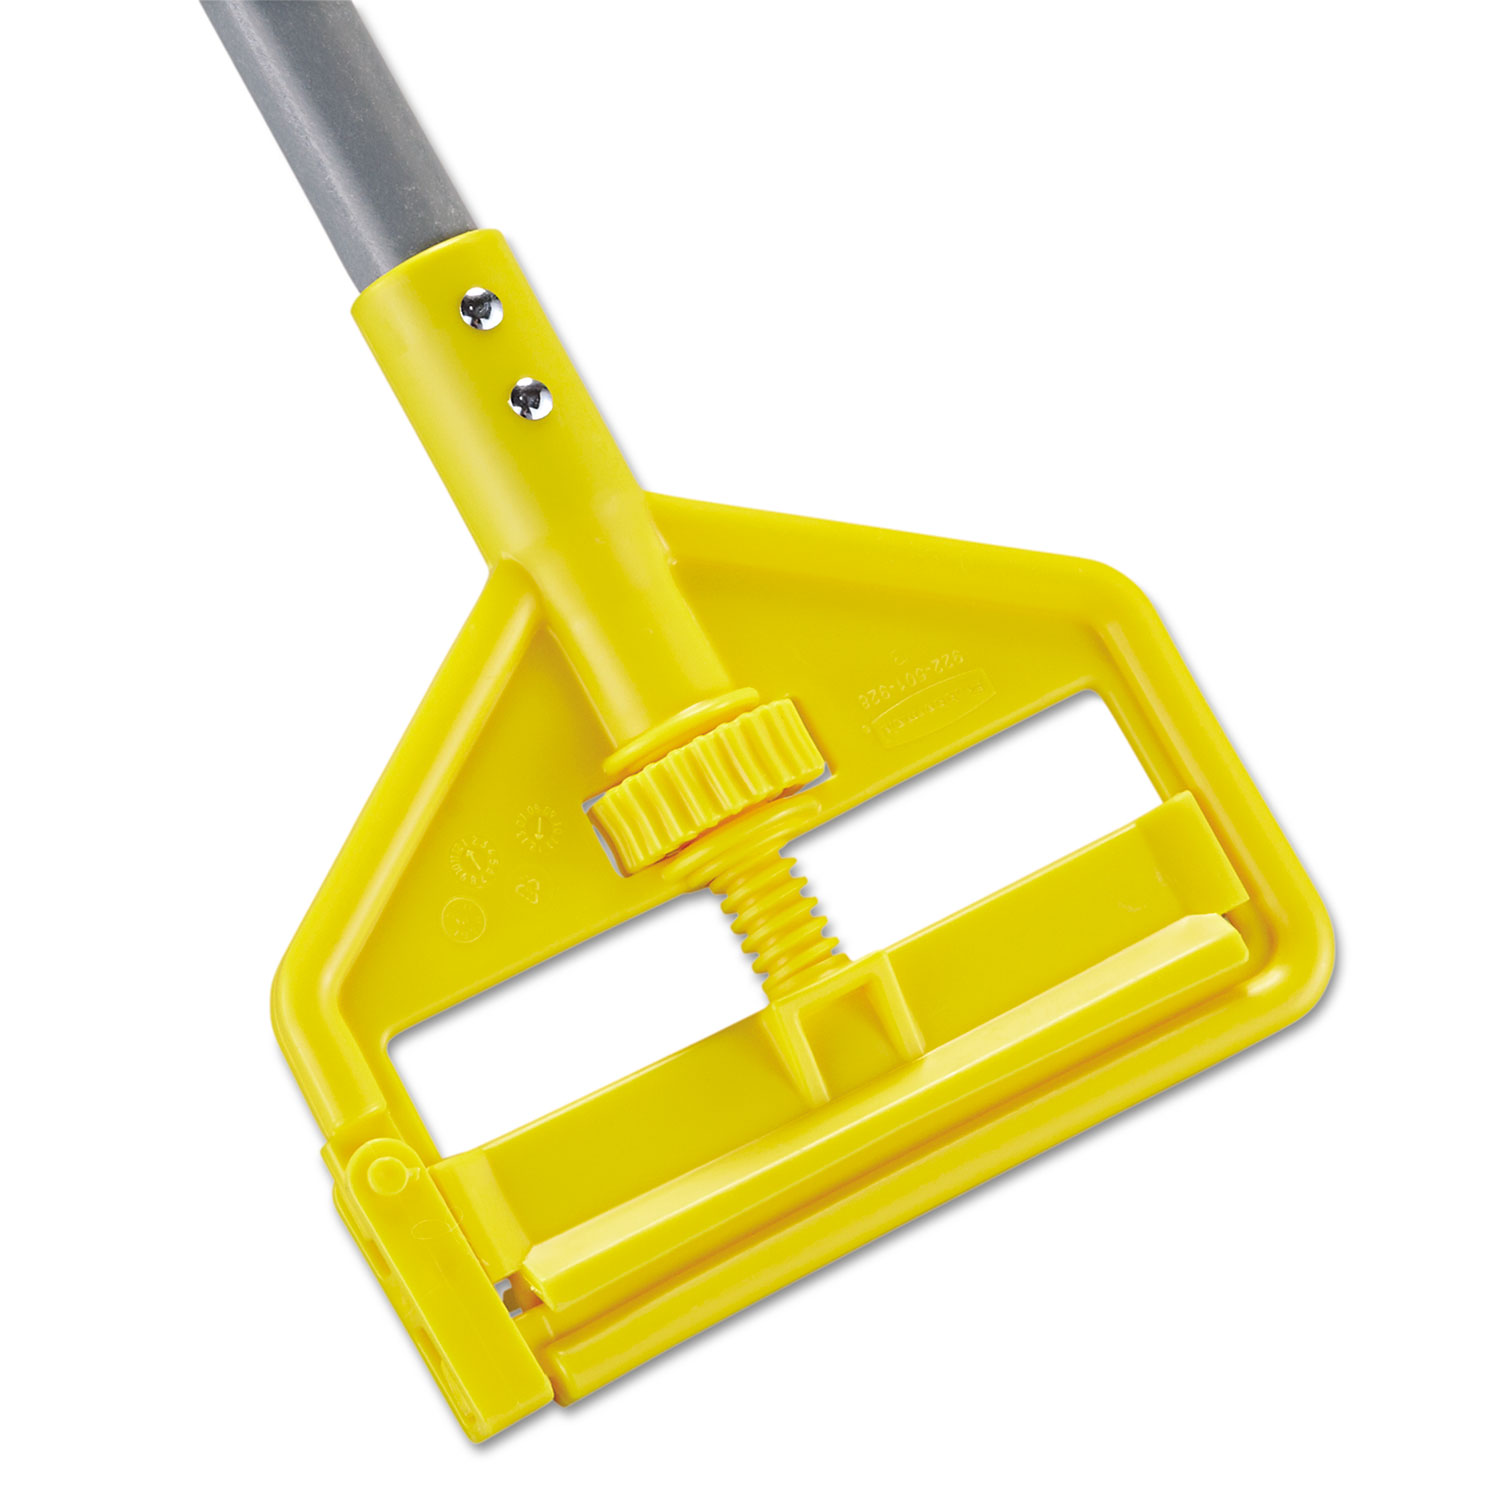  Rubbermaid Commercial H145000000 Invader Fiberglass Side-Gate Wet-Mop Handle, 1 dia x 54, Gray/Yellow (RCPH145) 